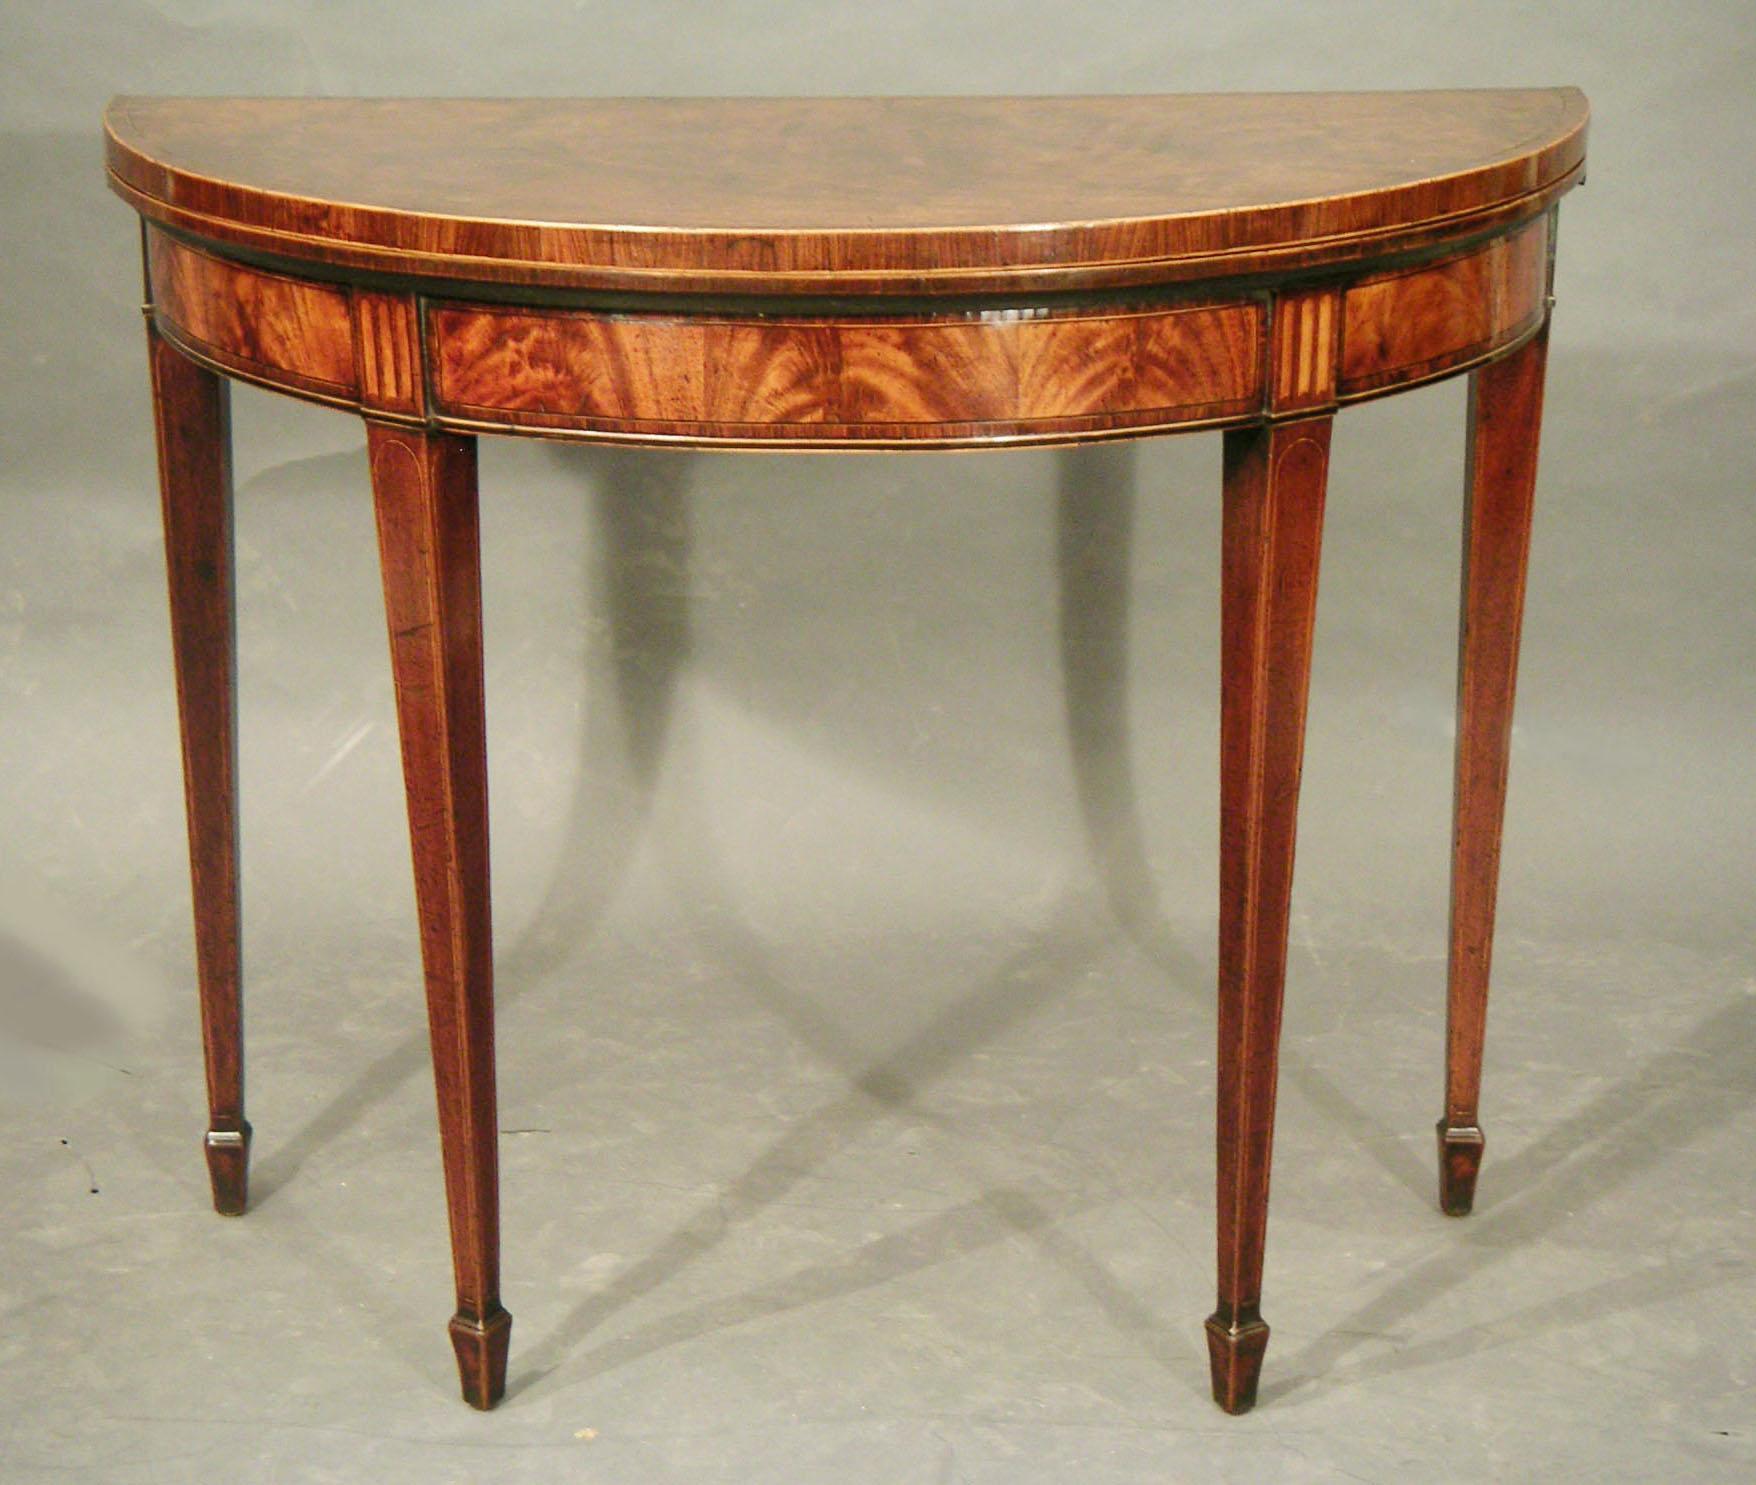 1785 table